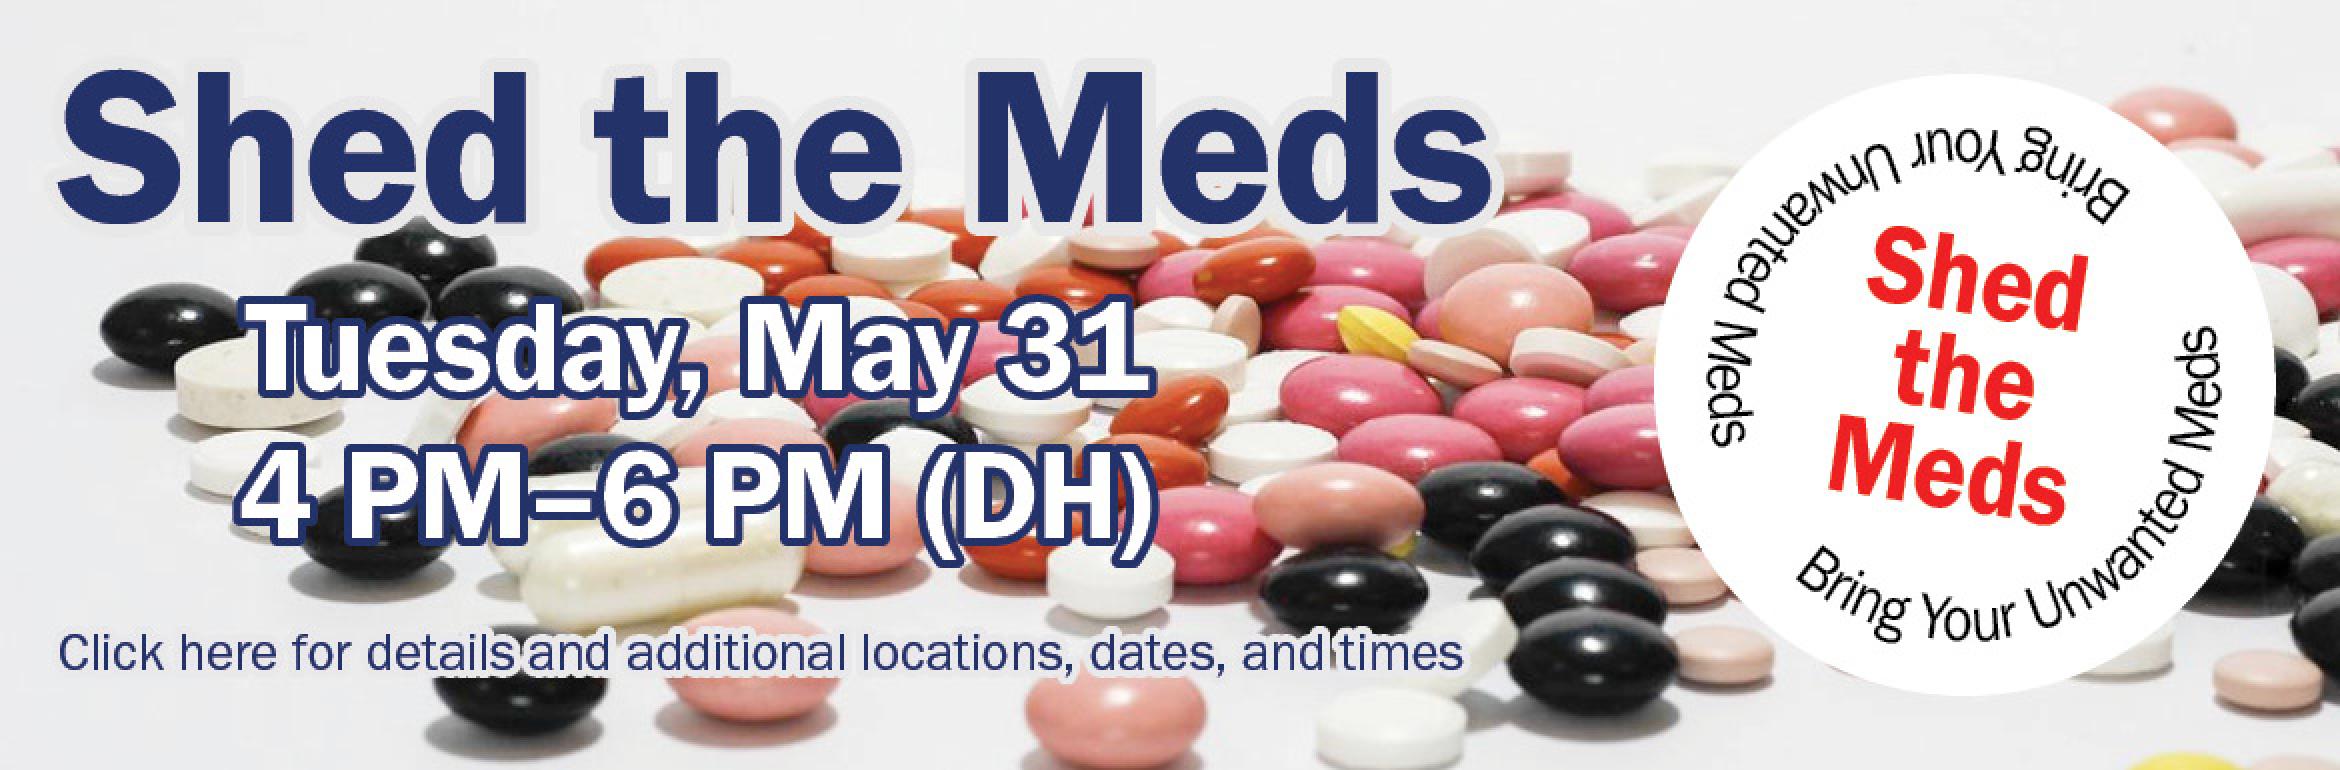 Shed the Meds. [Image of various pills in the background.] Tuesday, May 31. 4 PM–6 PM (DH). Click here for details and additional locations, dates, and times. [A circle on the right reads, "Shed the Meds. Bring Your Unwanted Meds."]